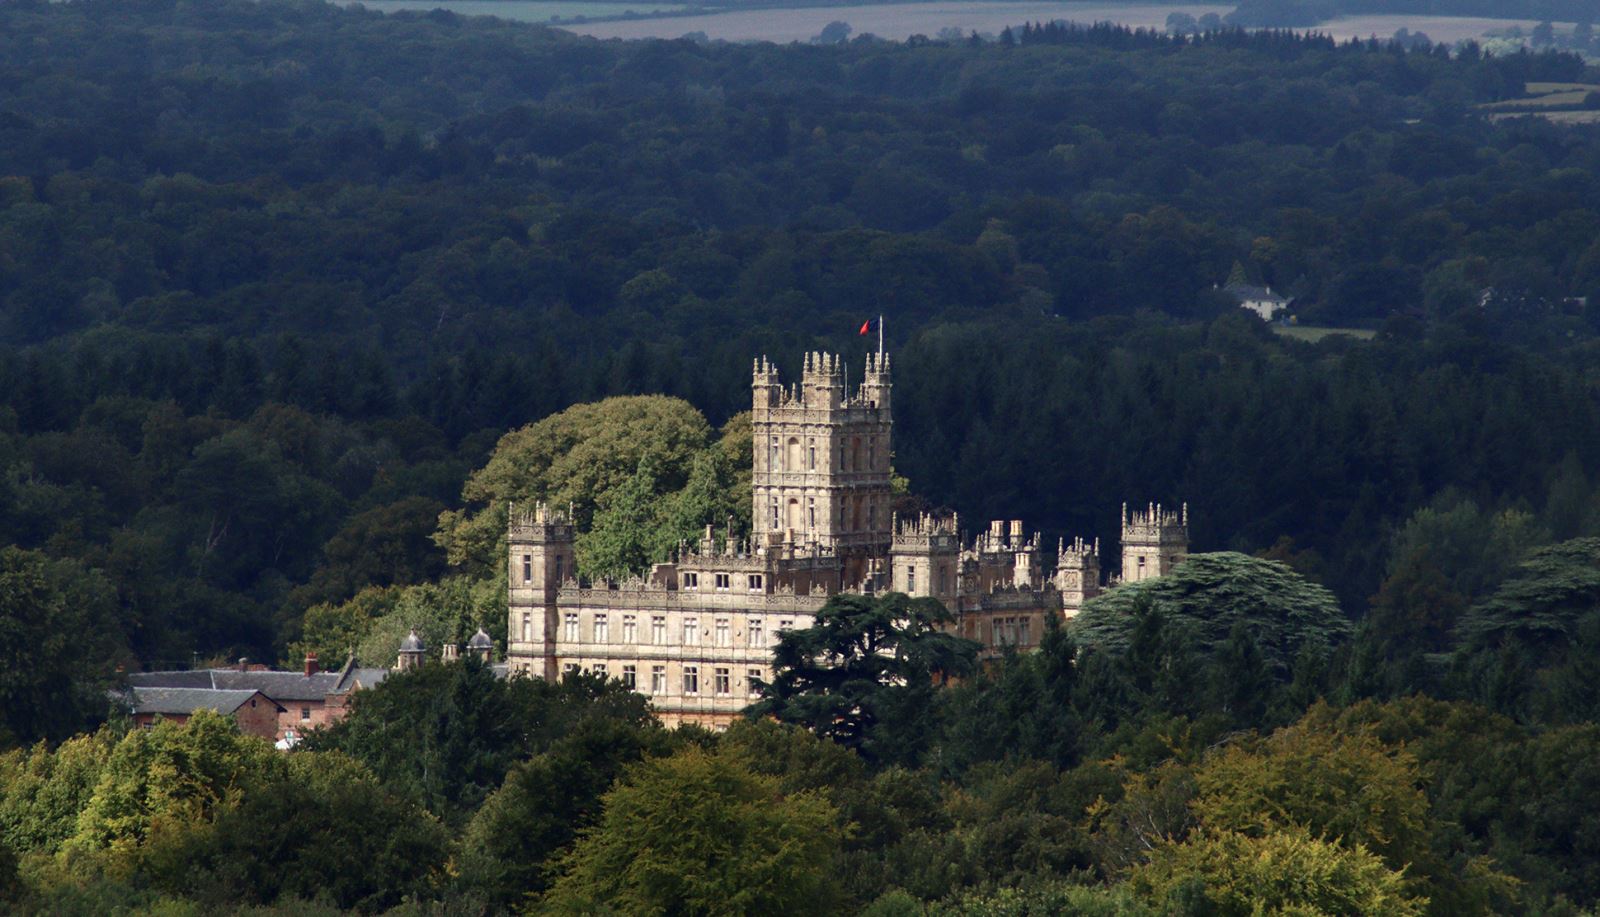 View over Highclere Castle